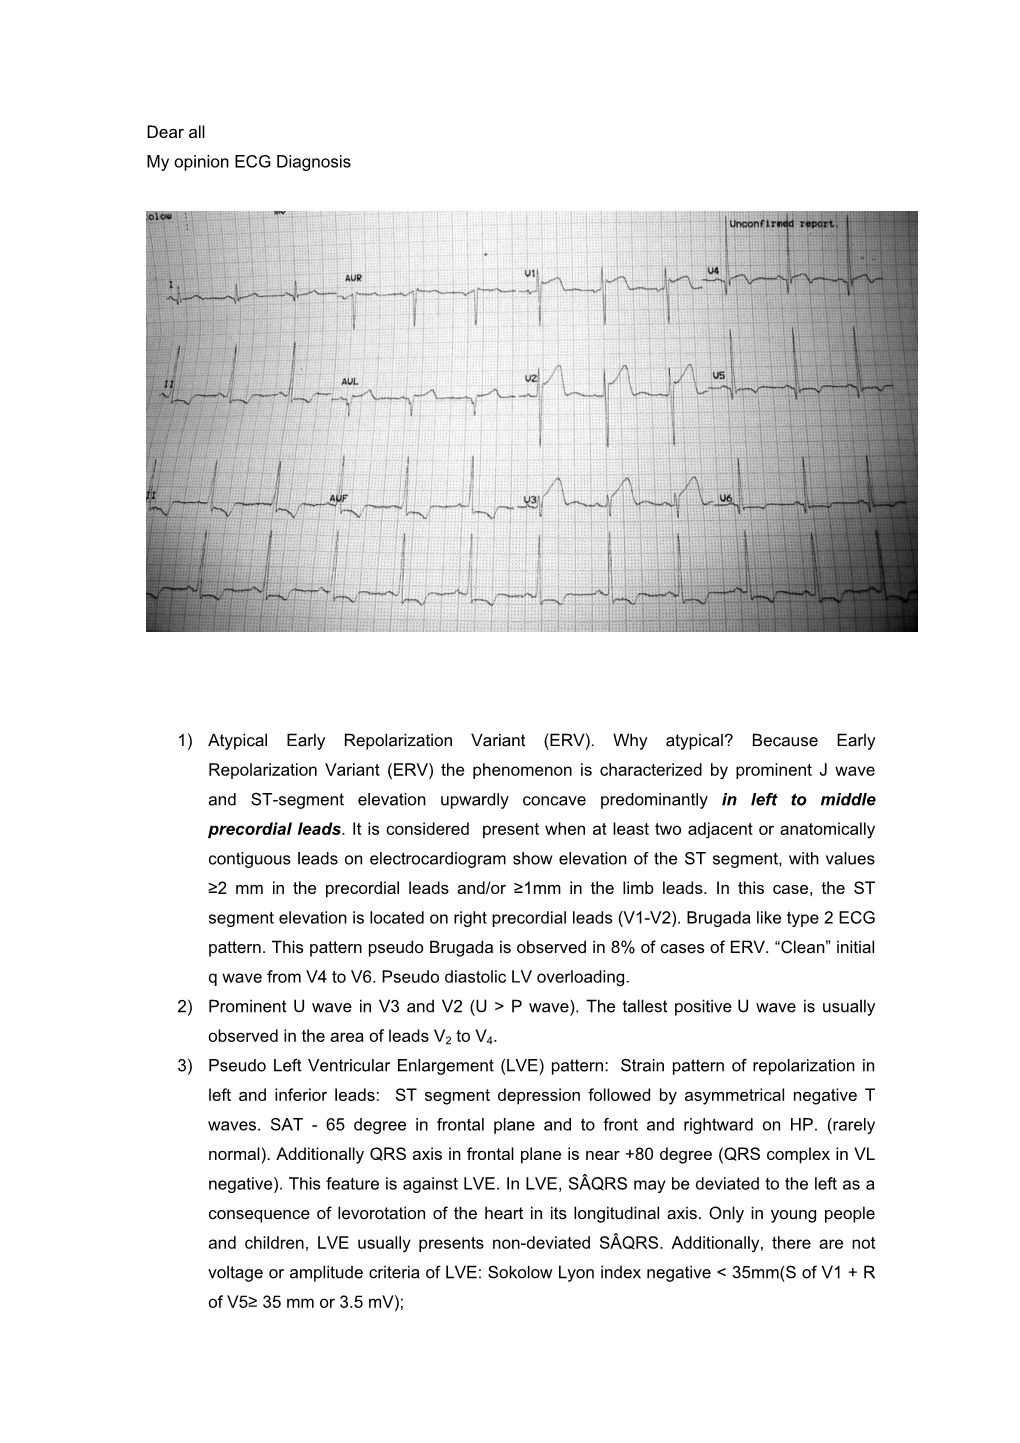 Dear All My Opinion ECG Diagnosis 1) Atypical Early Repolarization